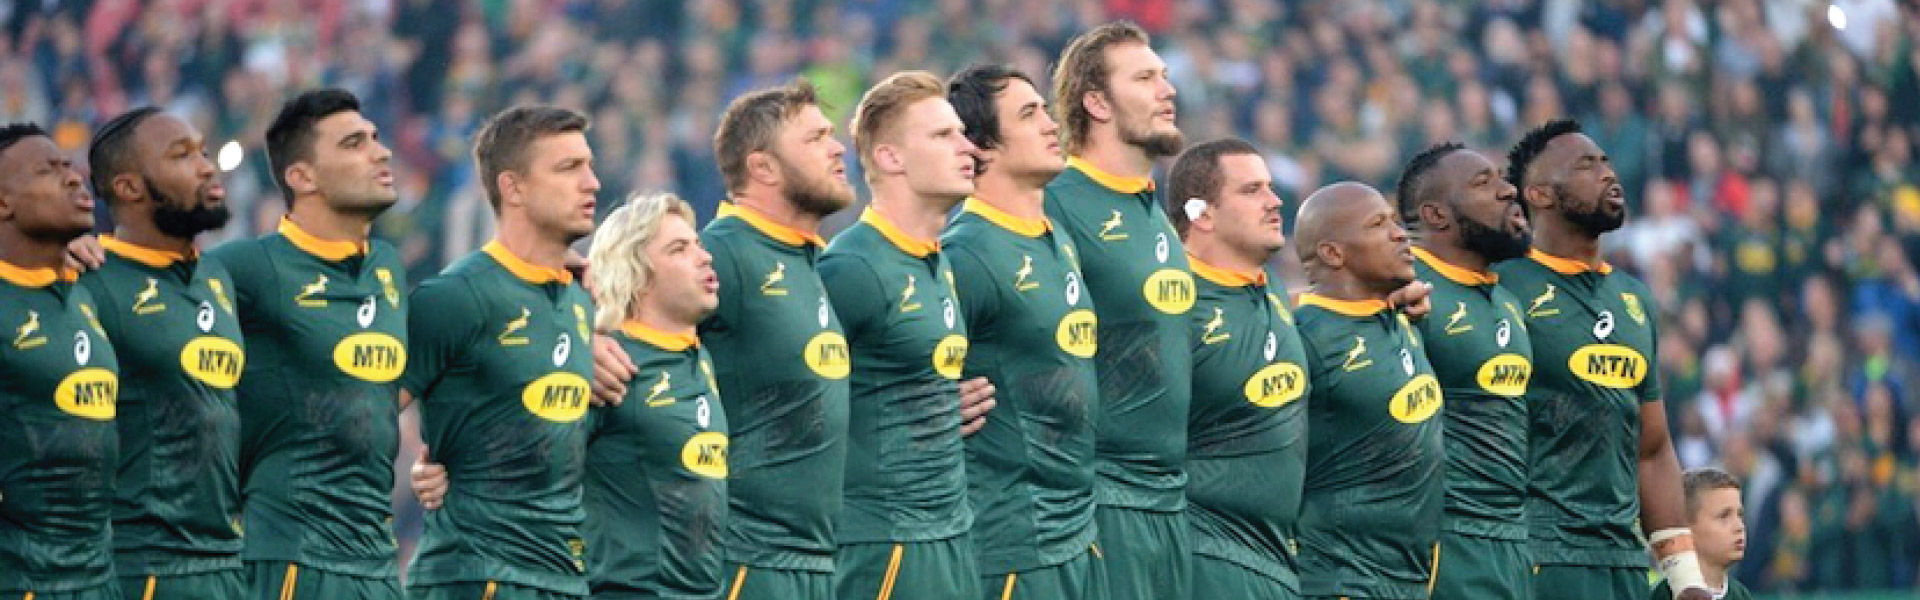 Impala Backs The Boks Rugby World Cup 2019 Schedule